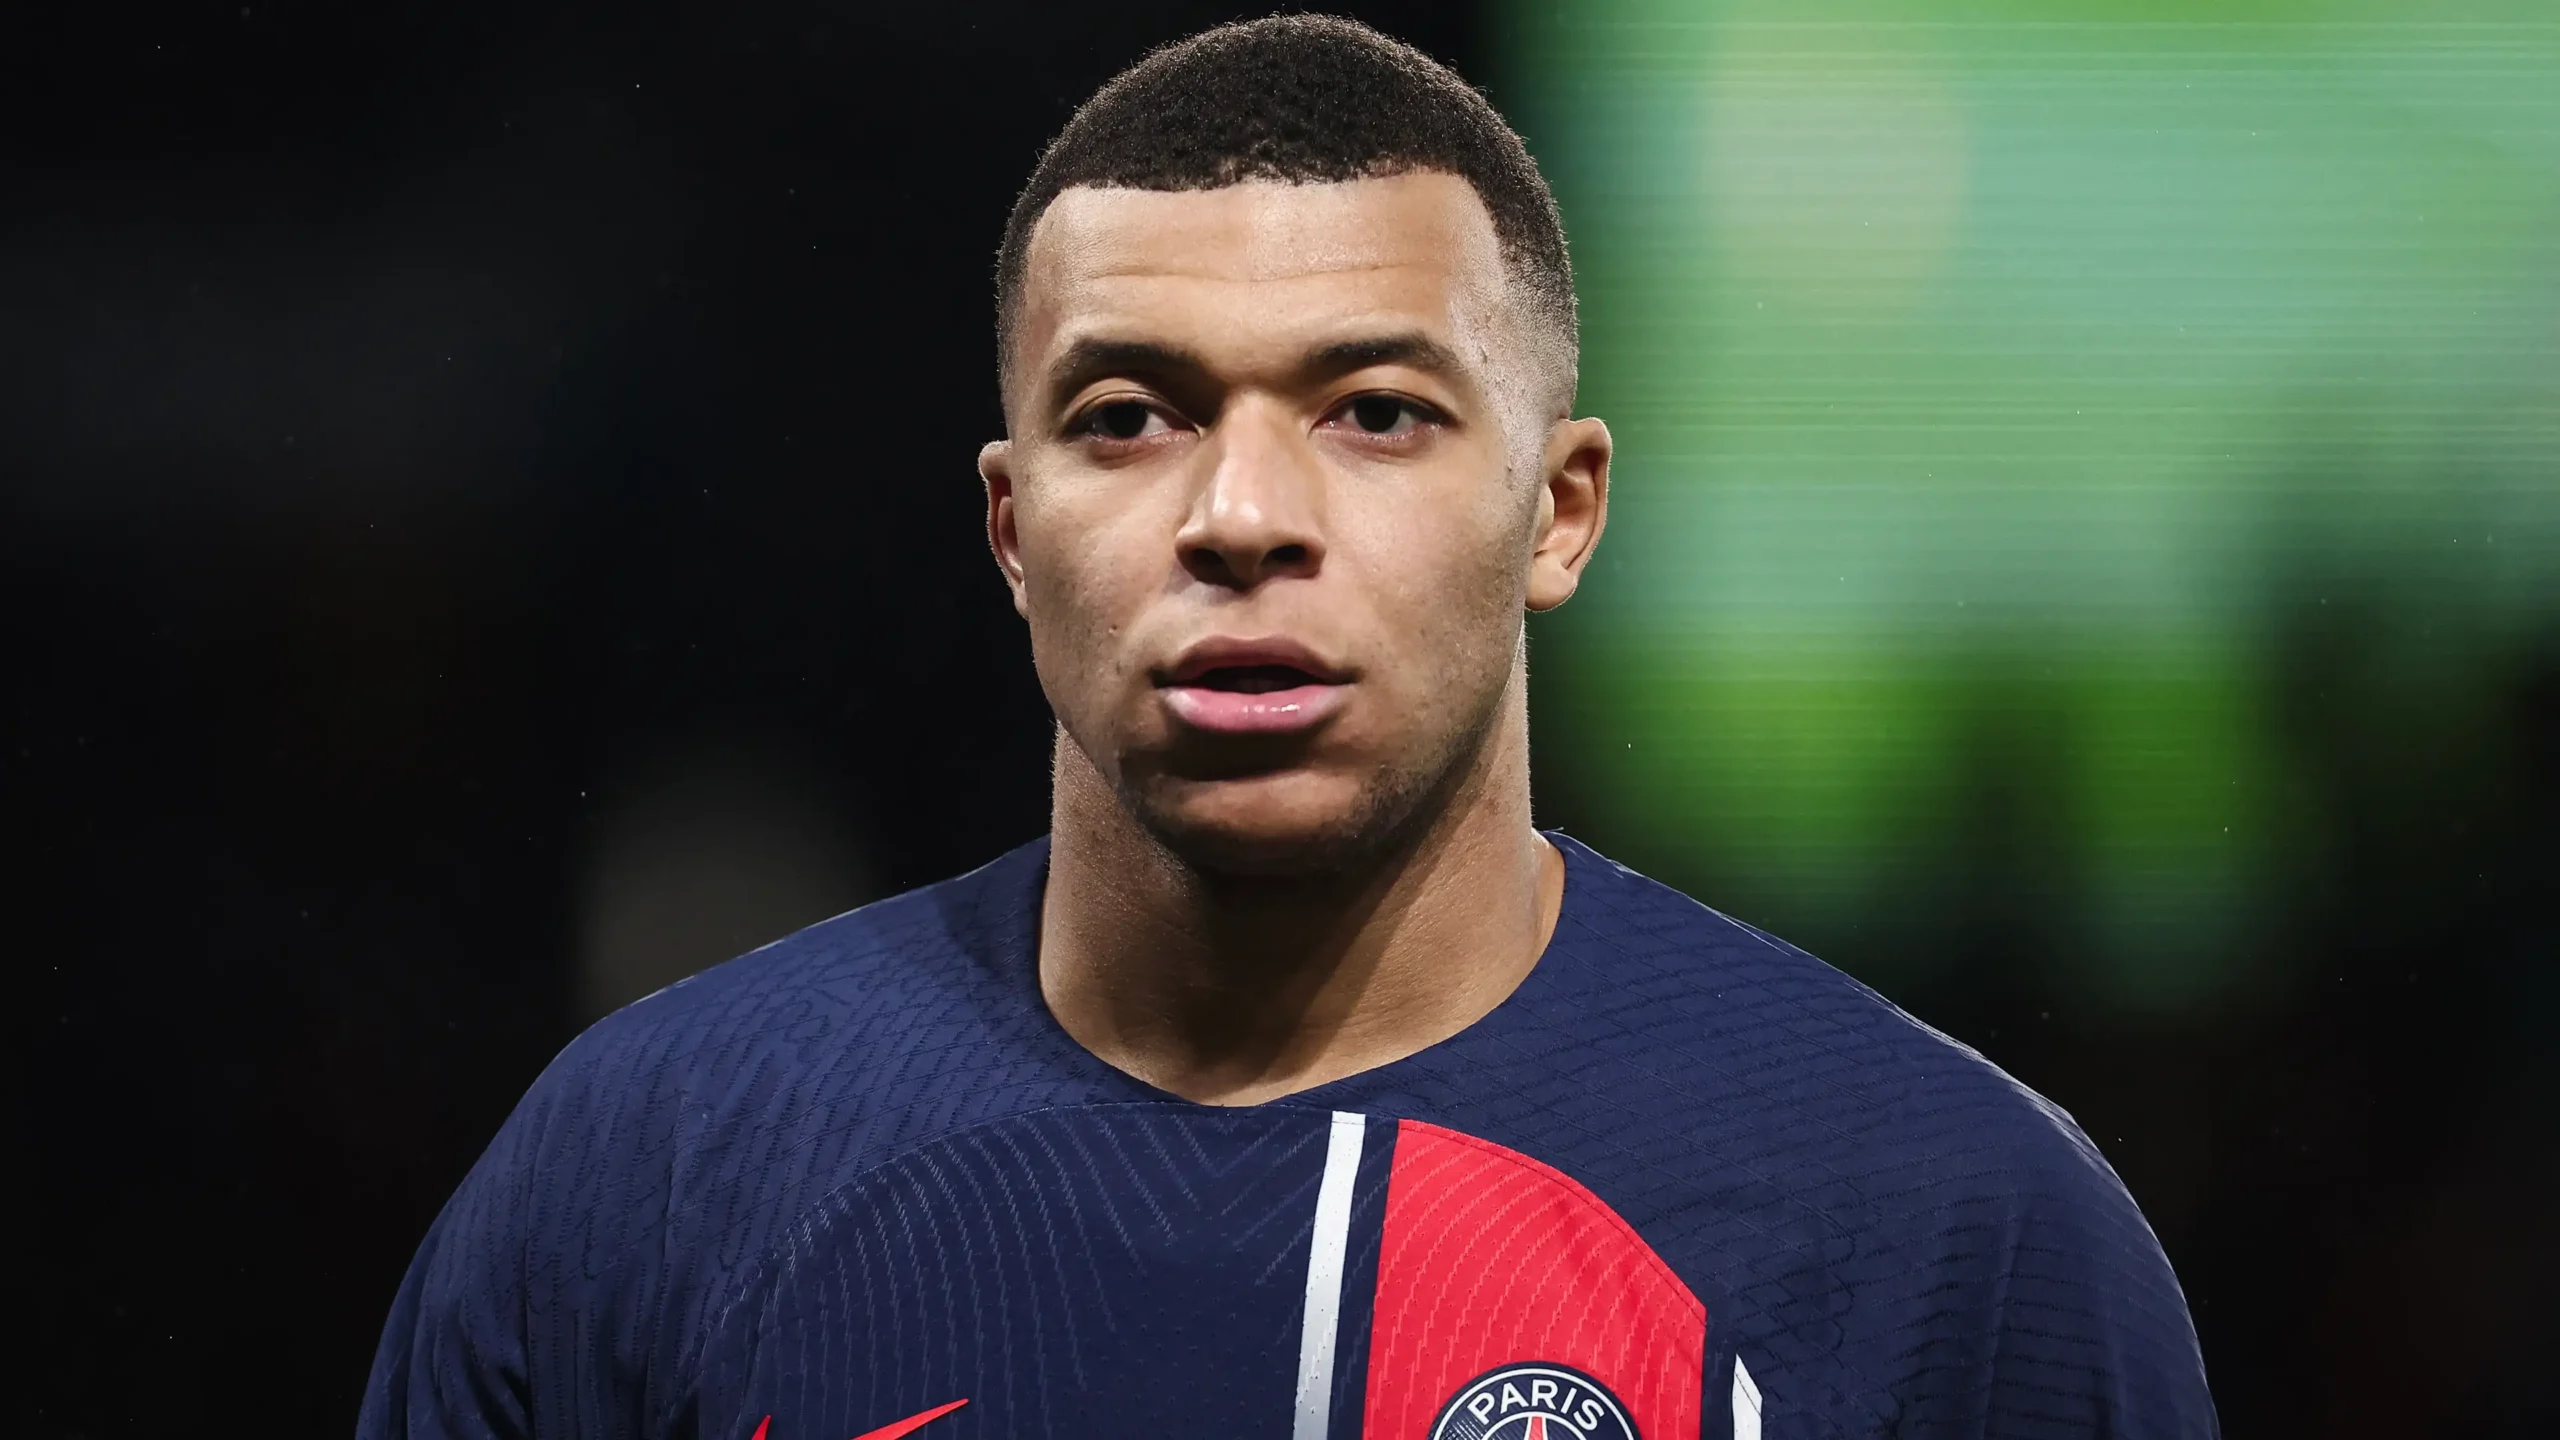 Kylian Mbappe to receive £85.5m